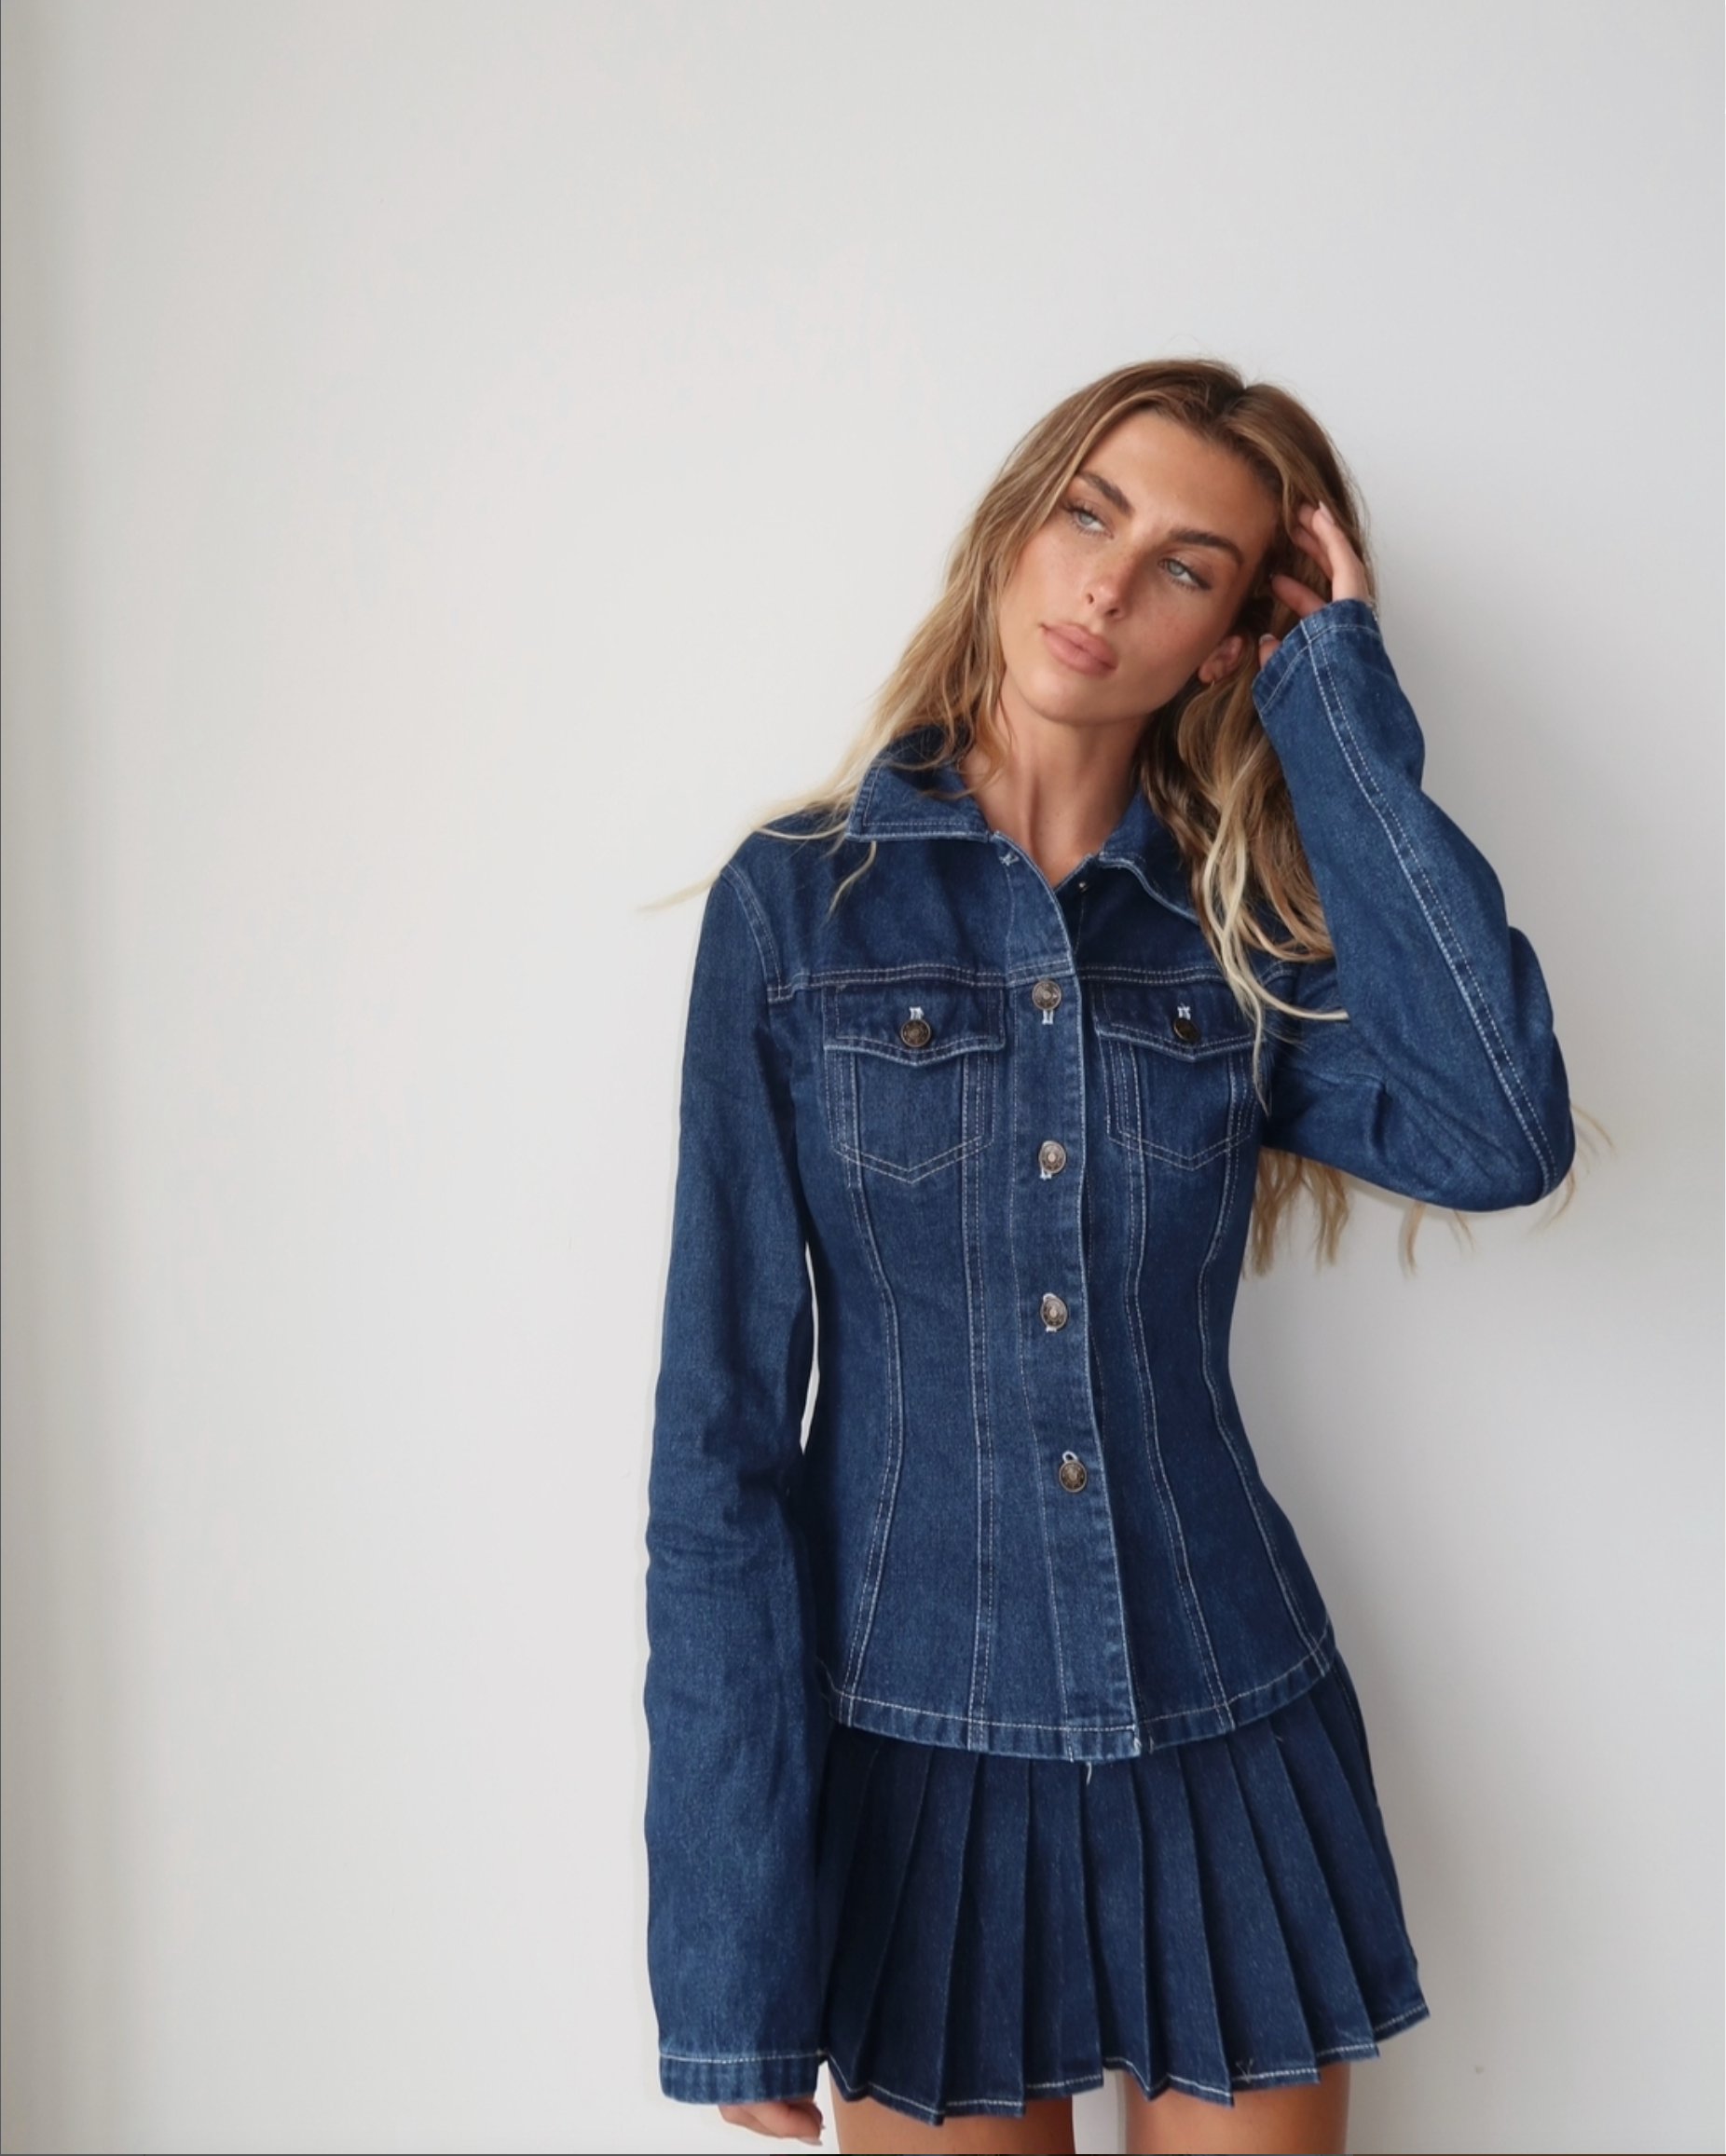 Double Denim: Must Have Sets to Rock this Trend